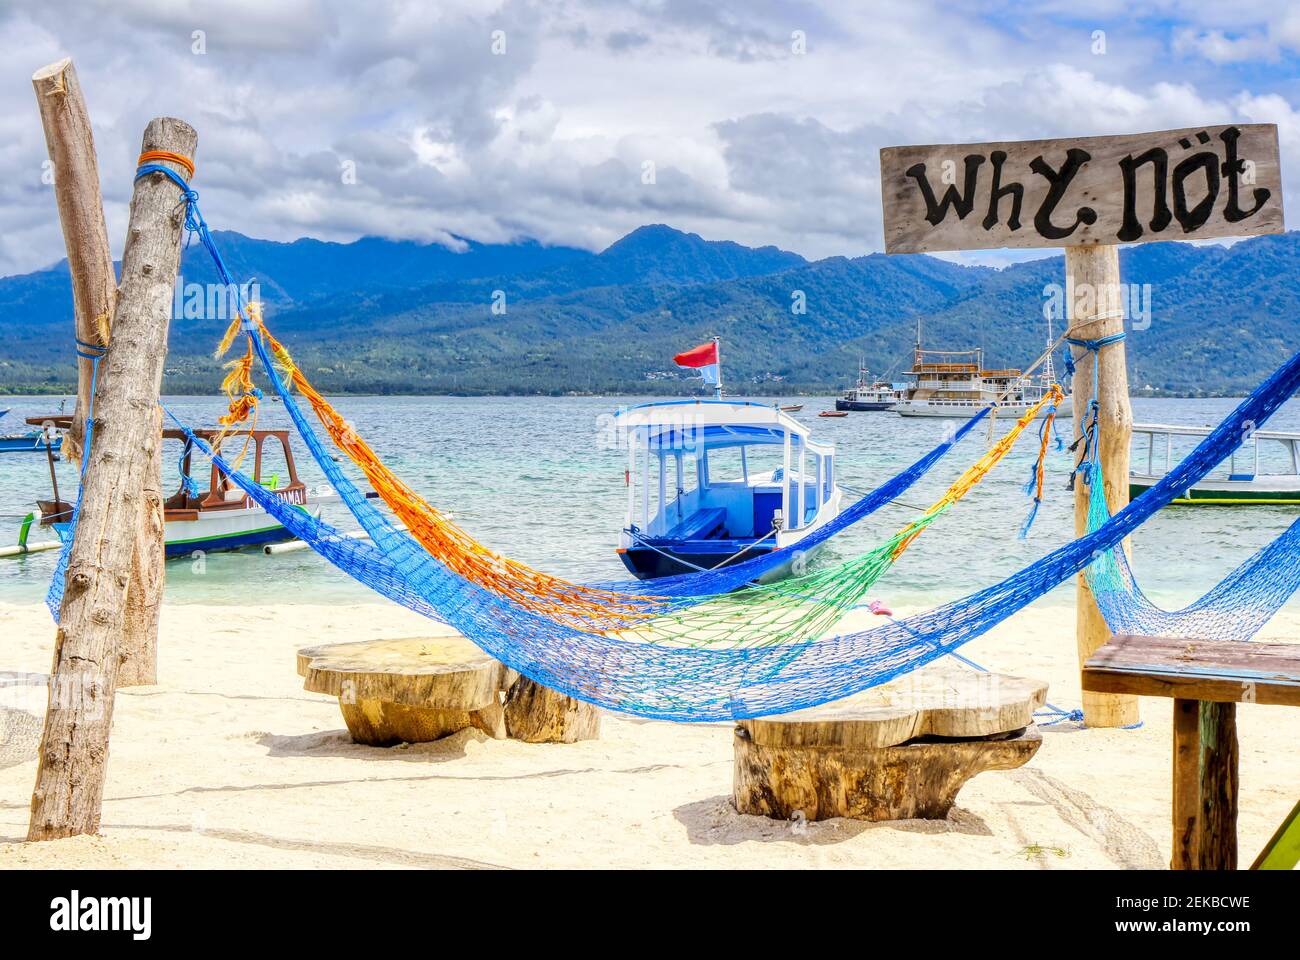 Gili Air Island in the Indian Ocean. 03.01.2017 Beach comfort. Scenery for the beach. Made by hand. Stock Photo